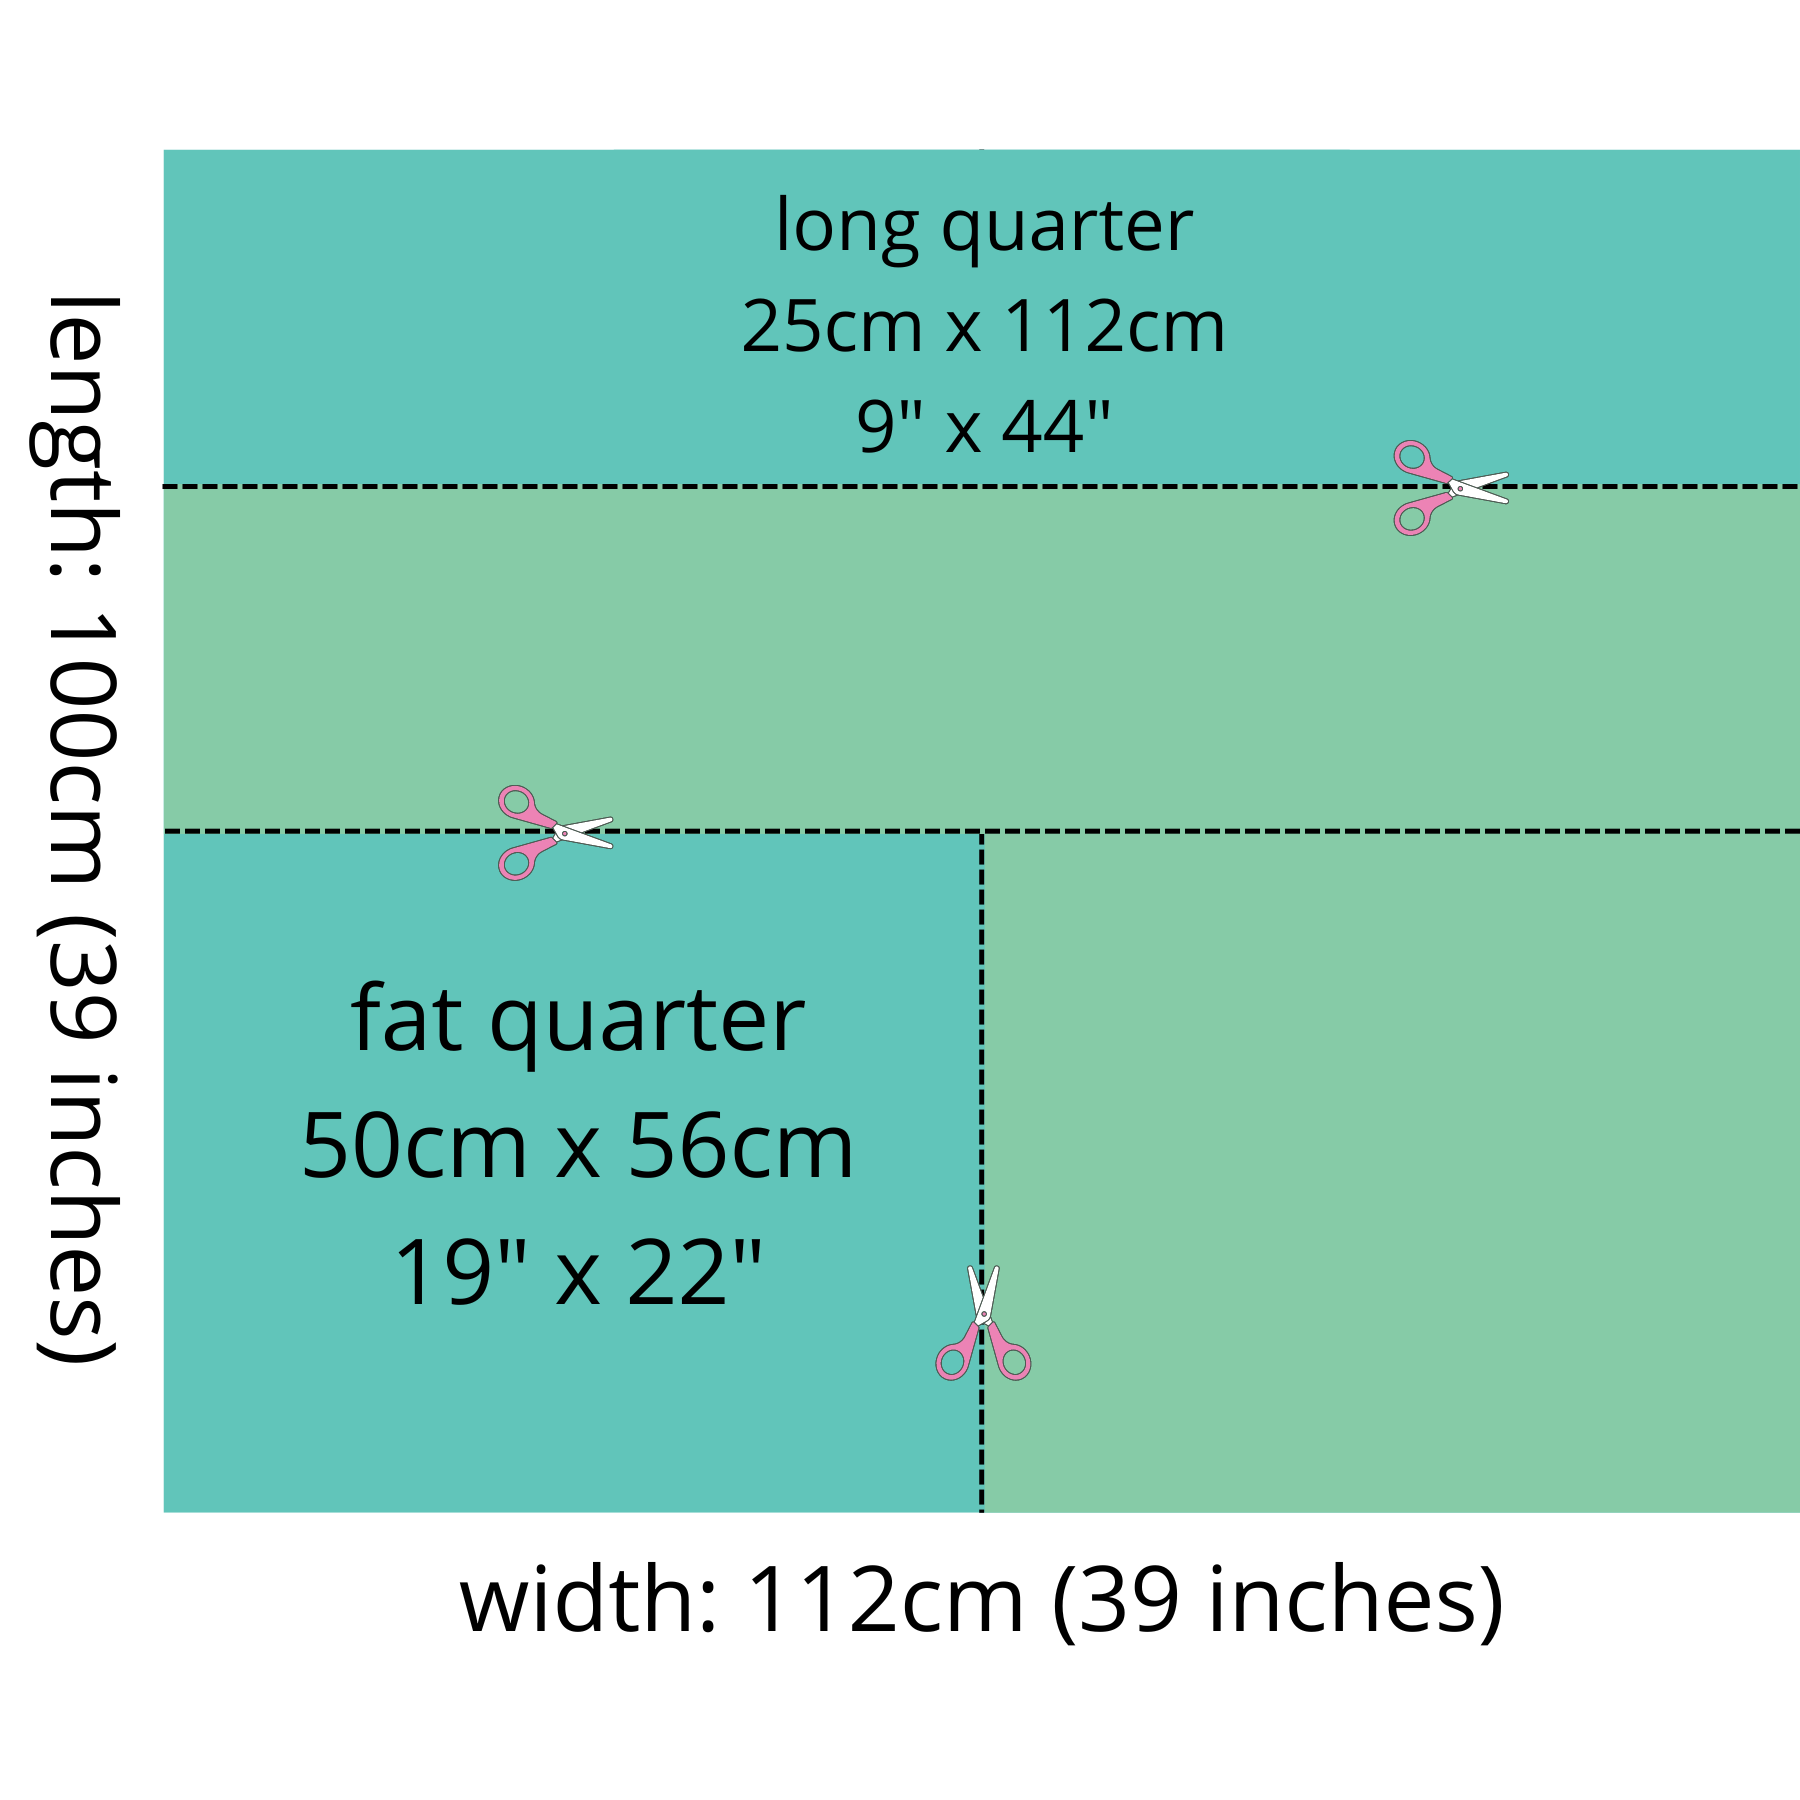 The difference between a quilting fabric fat quarter and a quilting fabric long quarter diagram